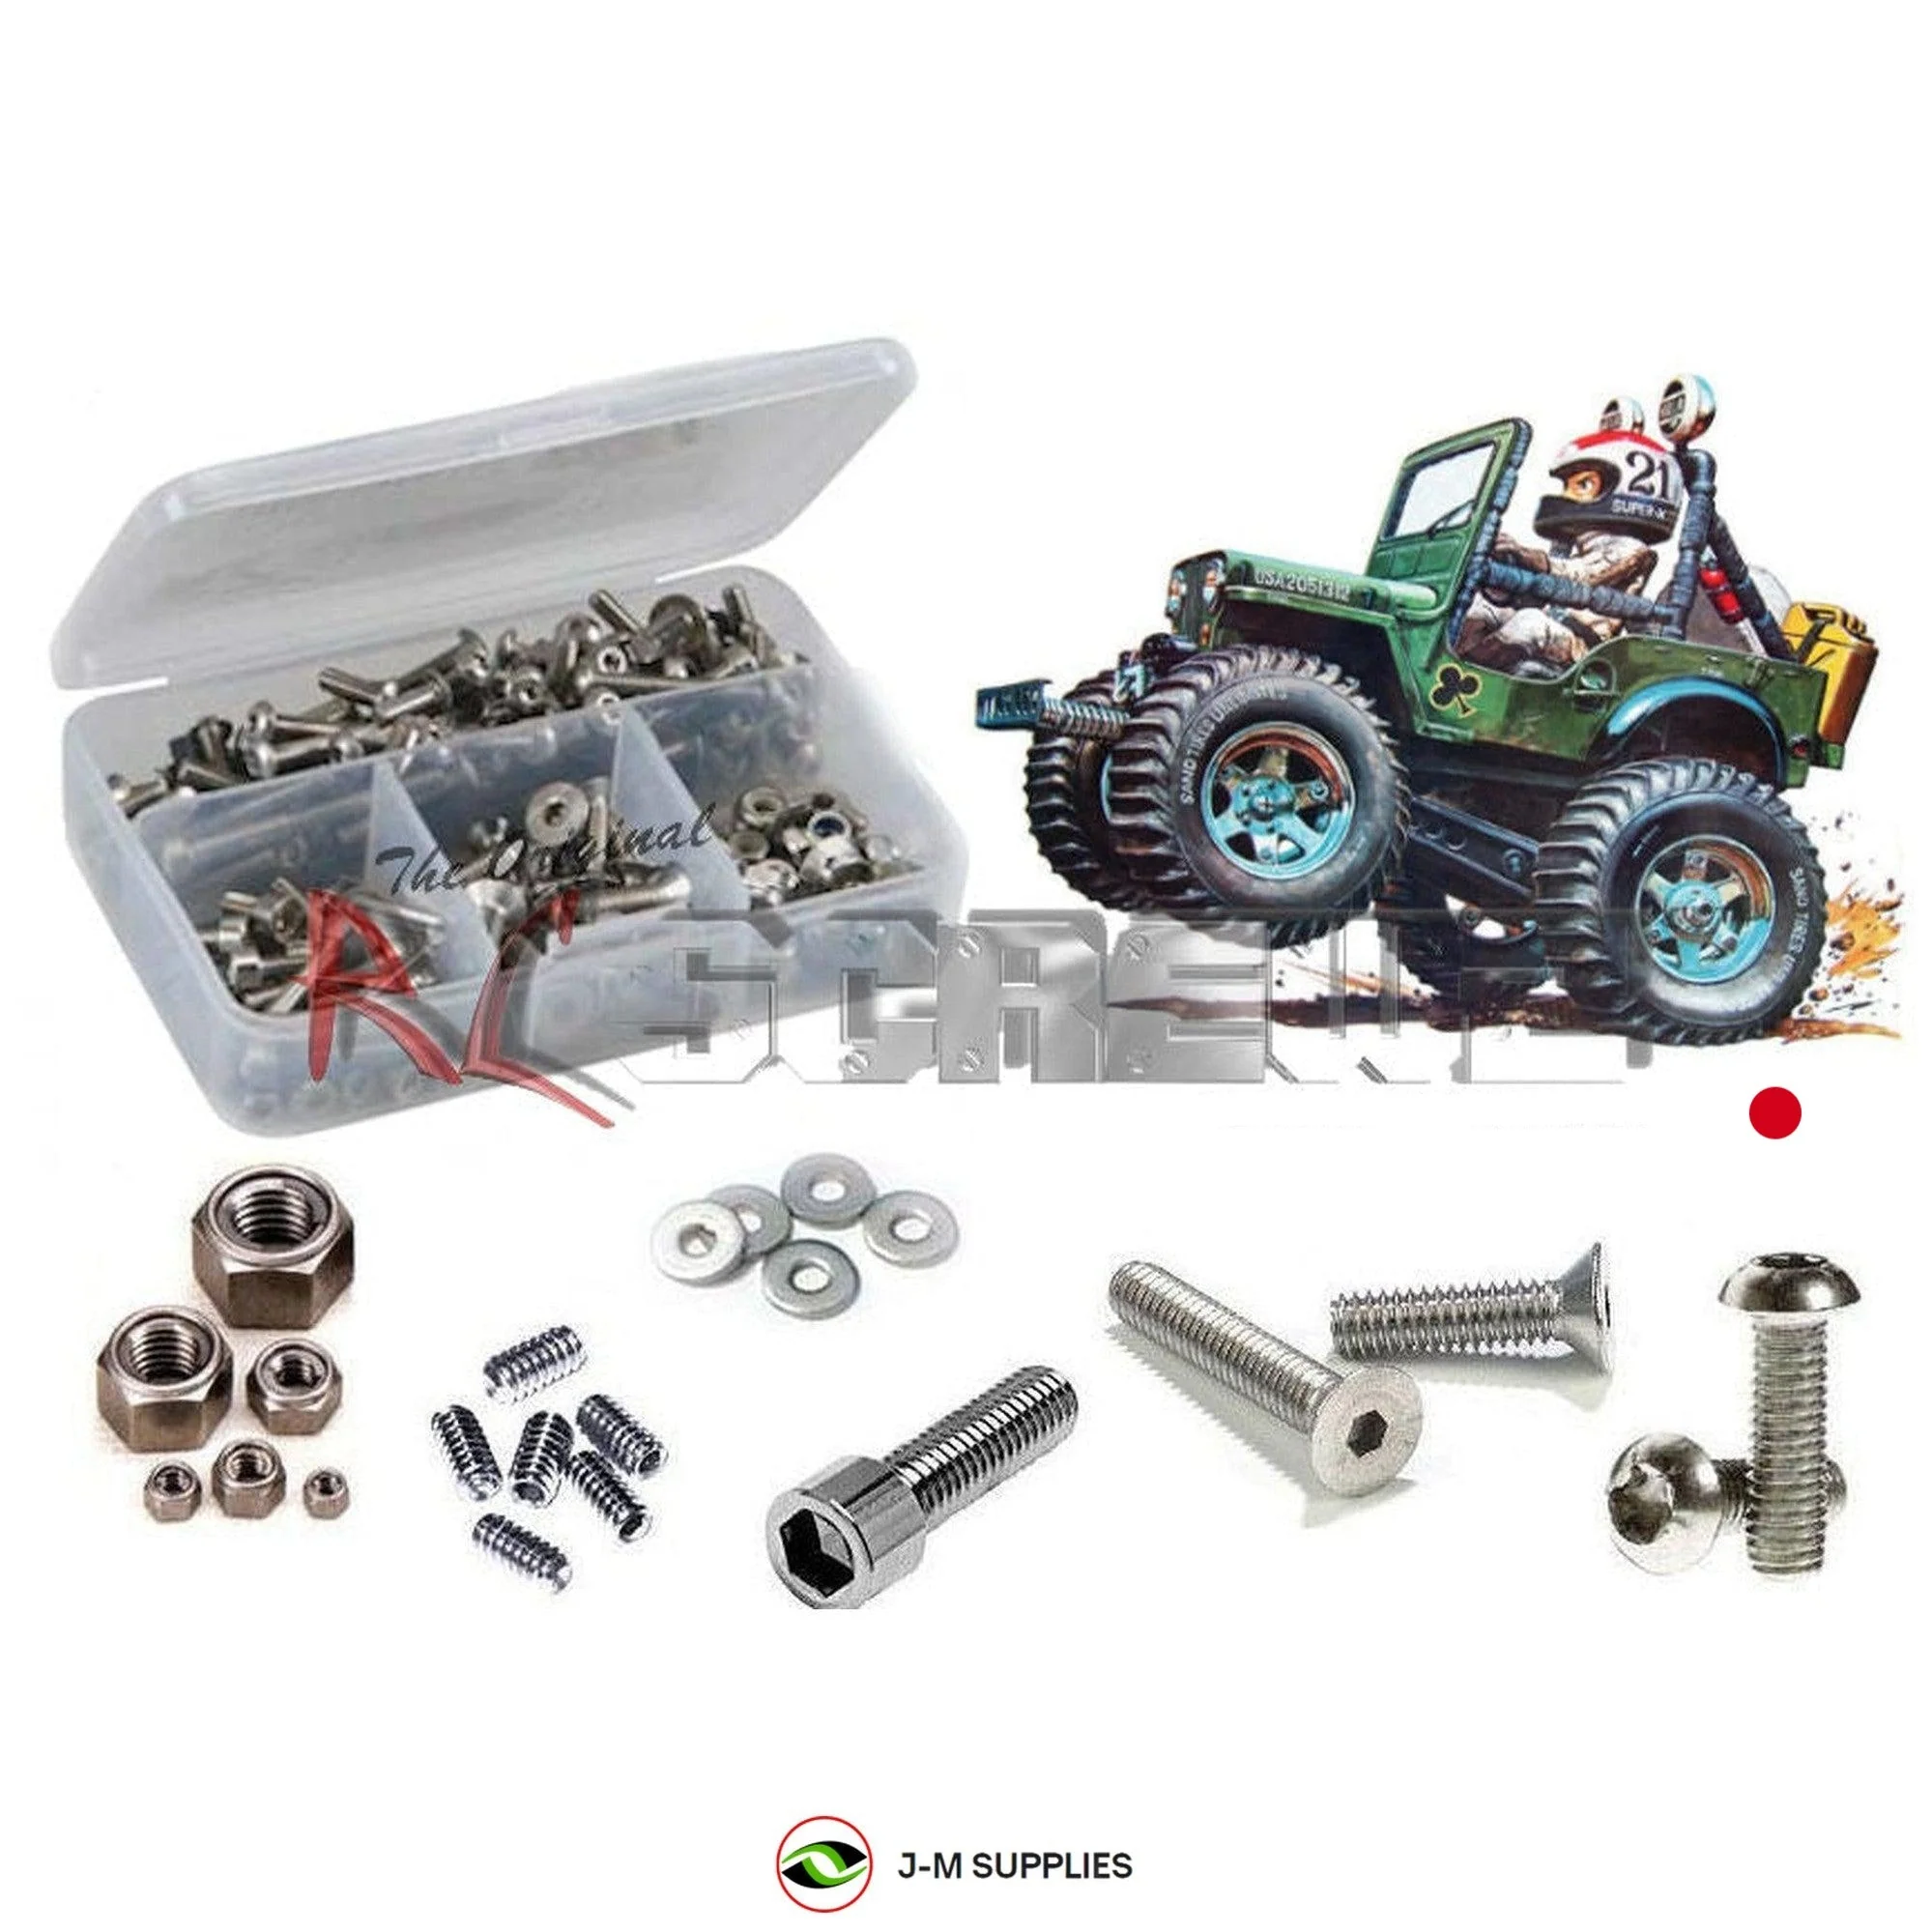 RCScrewZ Stainless Steel Screw Kit tam222 for Tamiya Wild Willy M38 #58035 - Picture 1 of 12